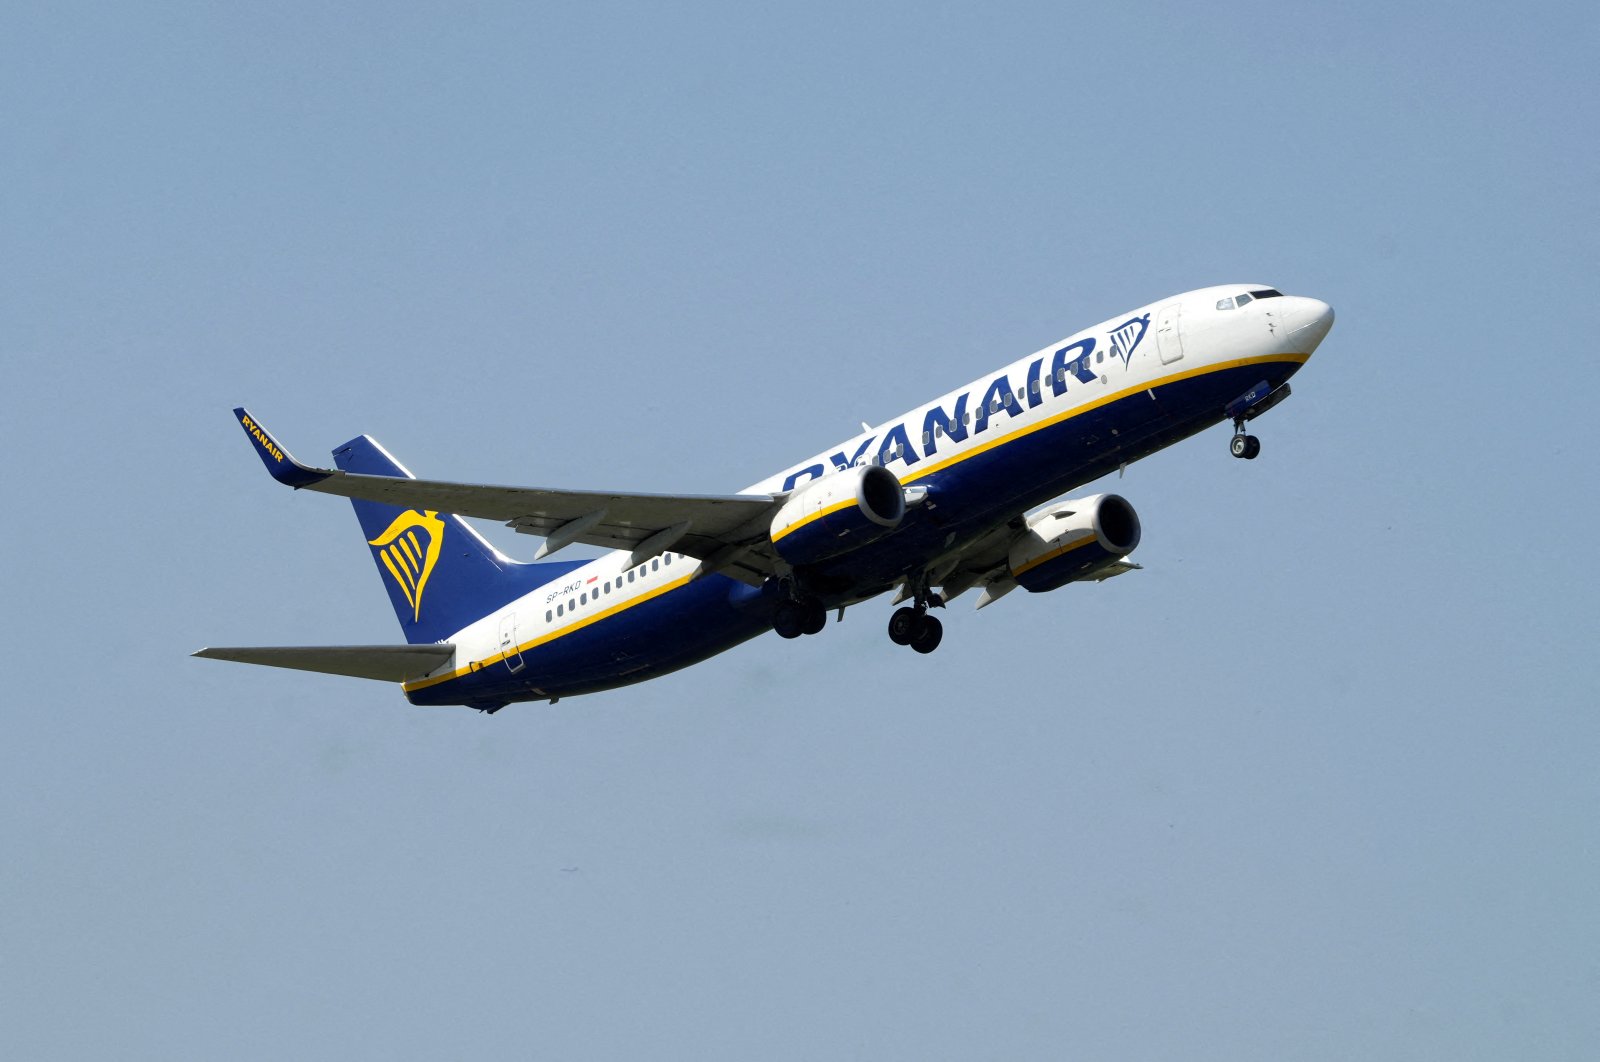 Ryanair aircraft Boeing 737-8AS takes off from Riga International Airport, Latvia, July 21, 2022. (Reuters Photo)